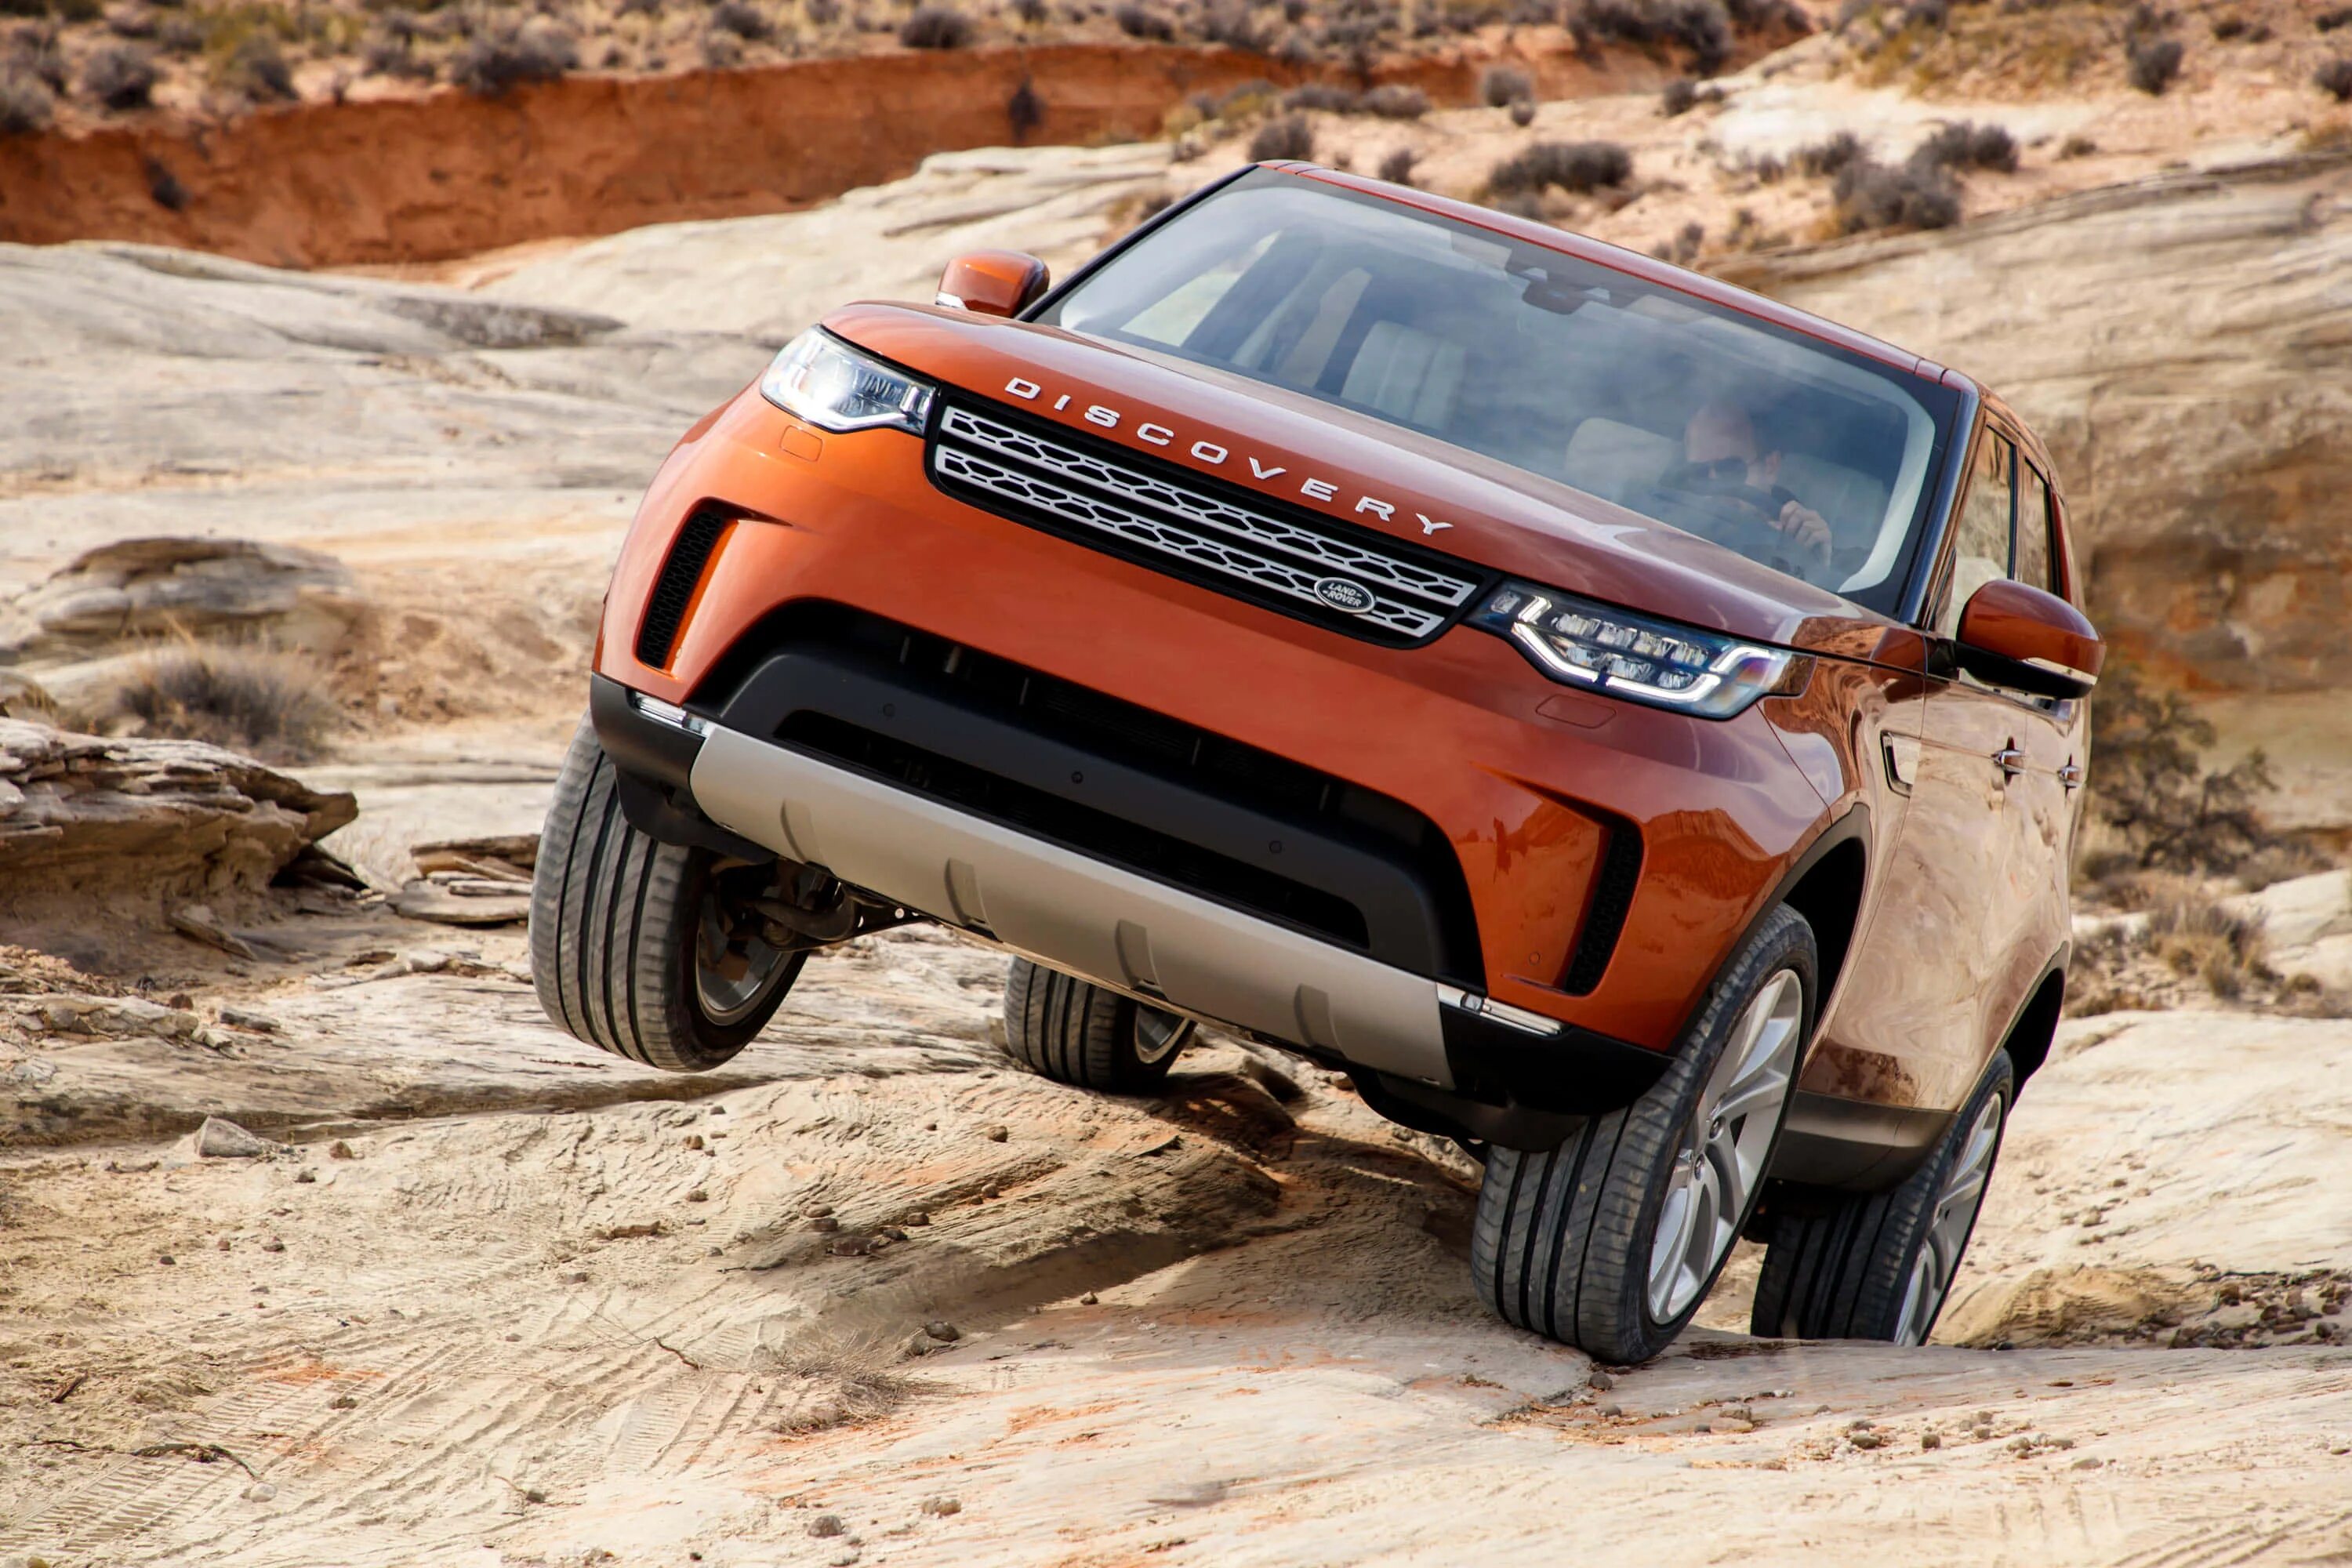 Land Rover Discovery новый. Land Rover Discovery 5. Ленд Ровер Дискавери оранжевый. Land Rover Discovery 5 Namib Orange. Тест дискавери